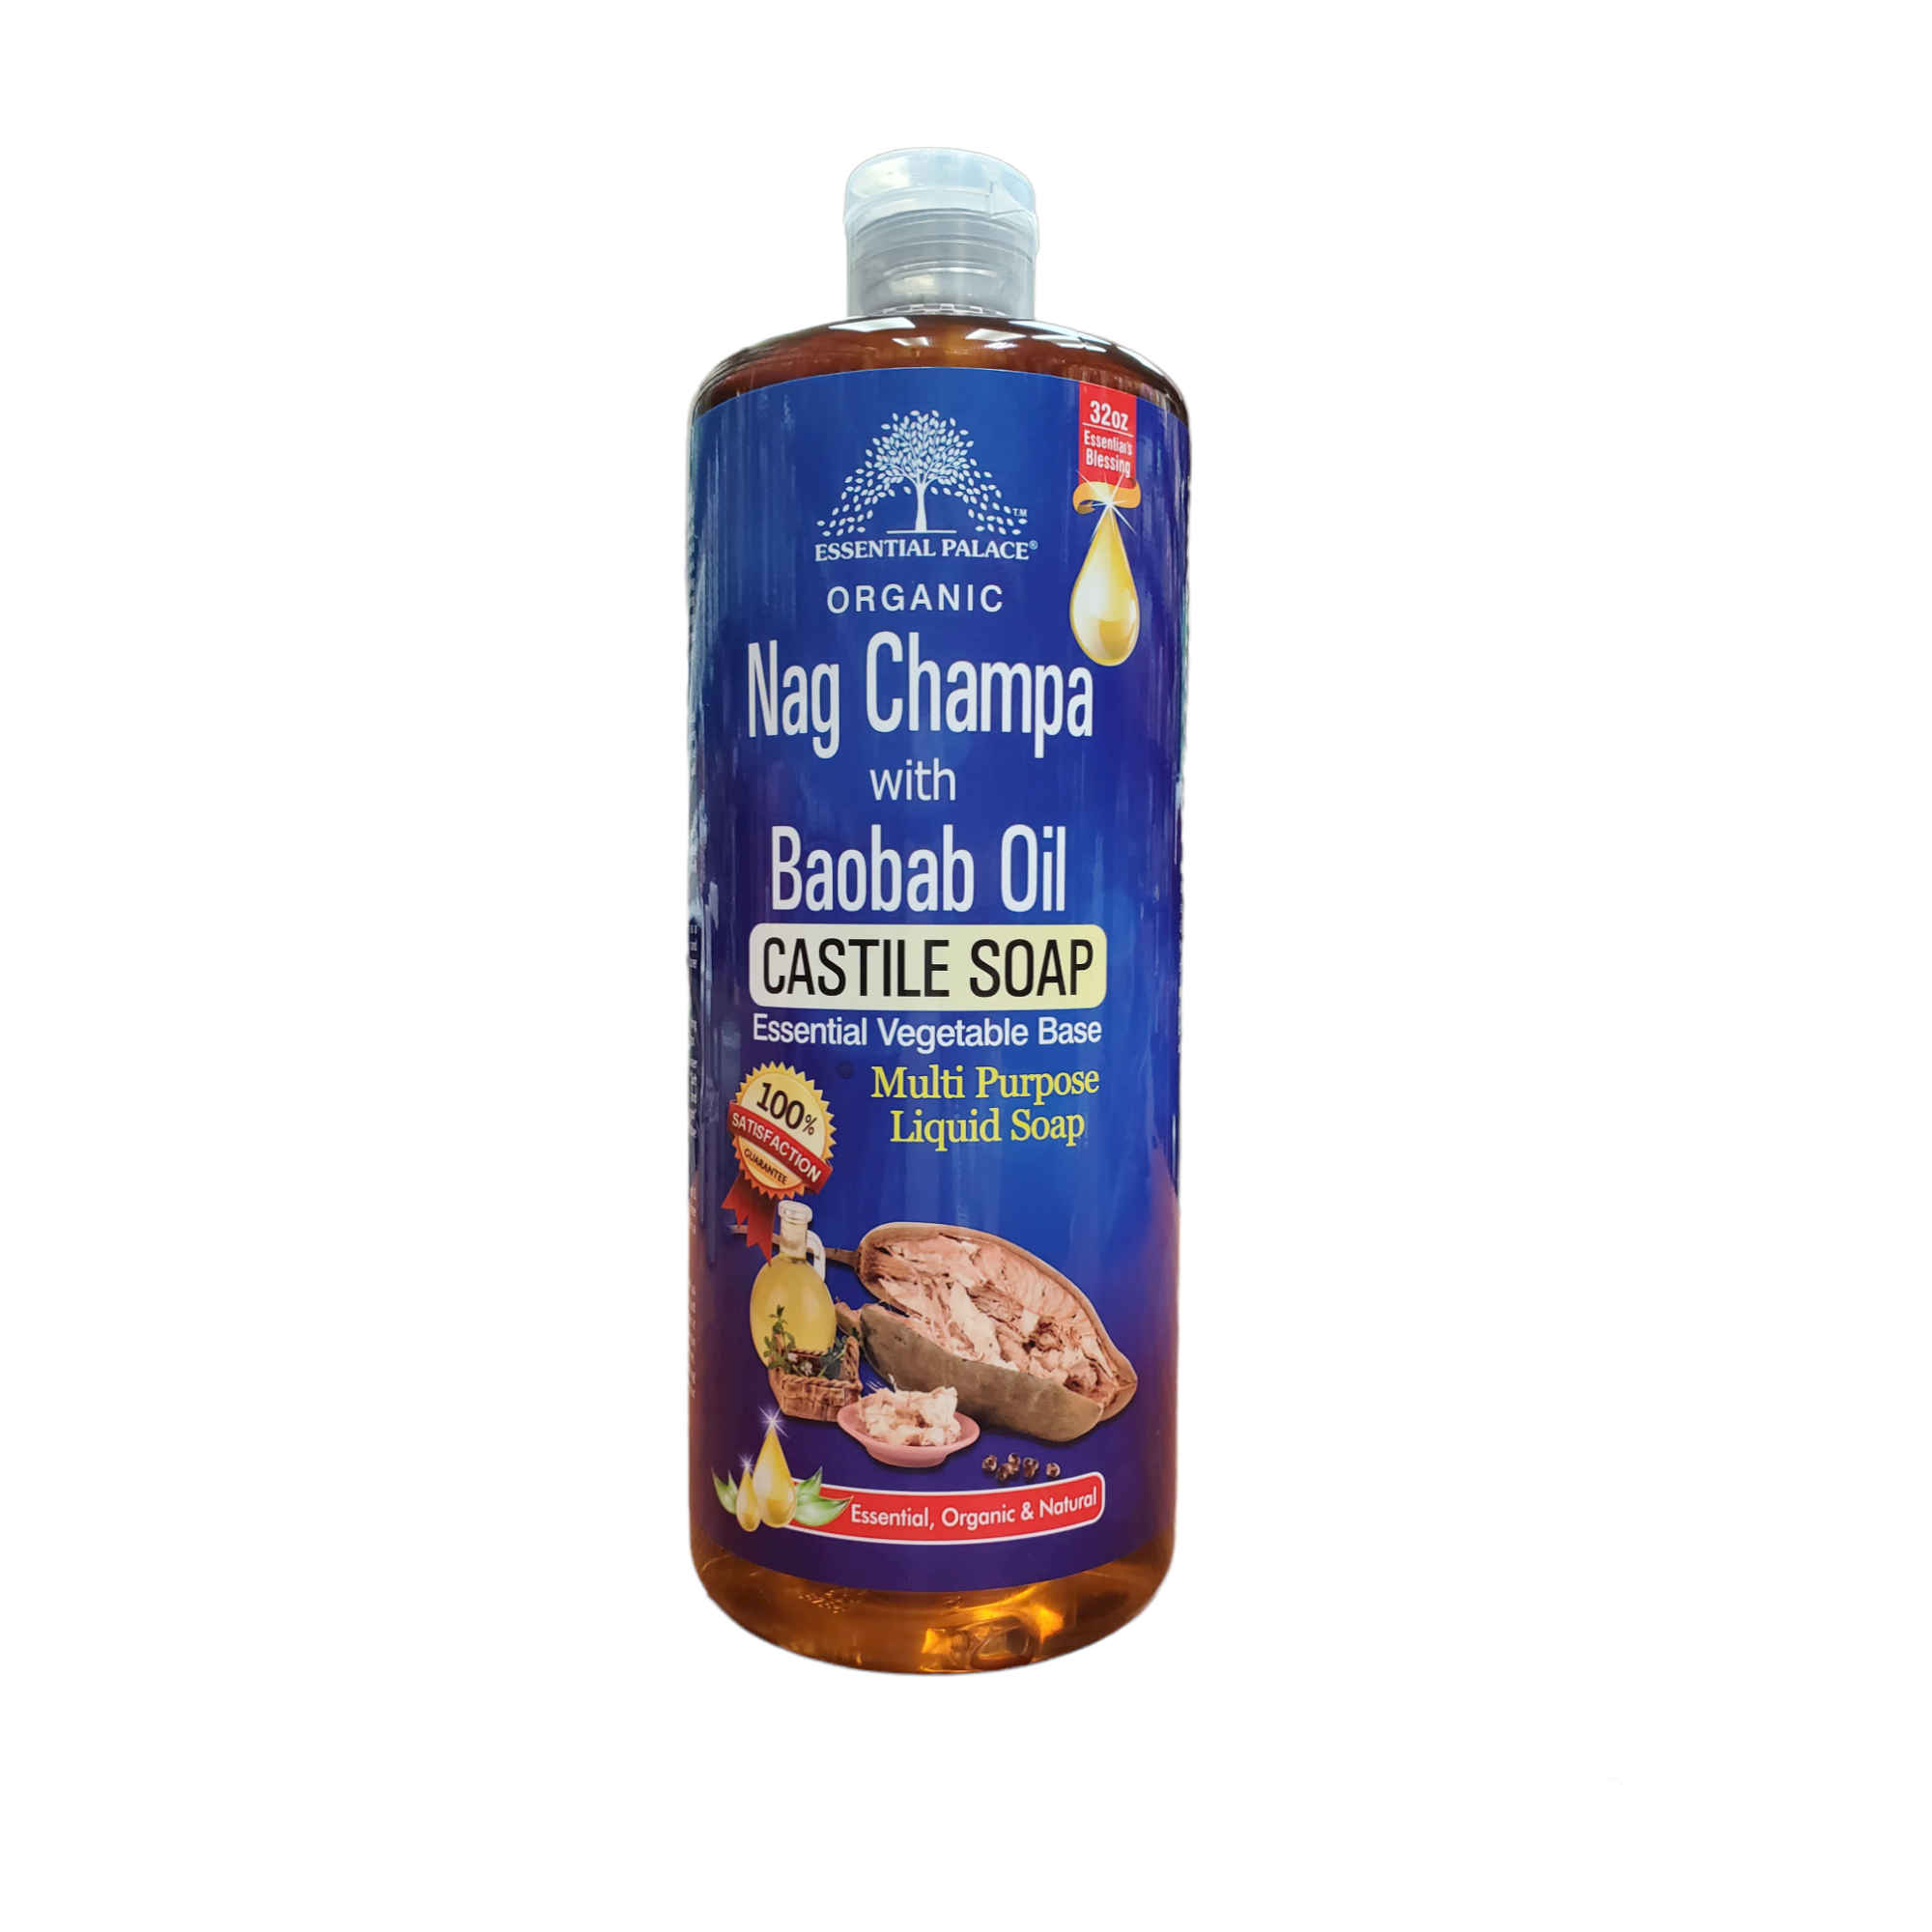 Essential Palace Nag Champa Castile Soap with Baobab Oil 32 OZ Front